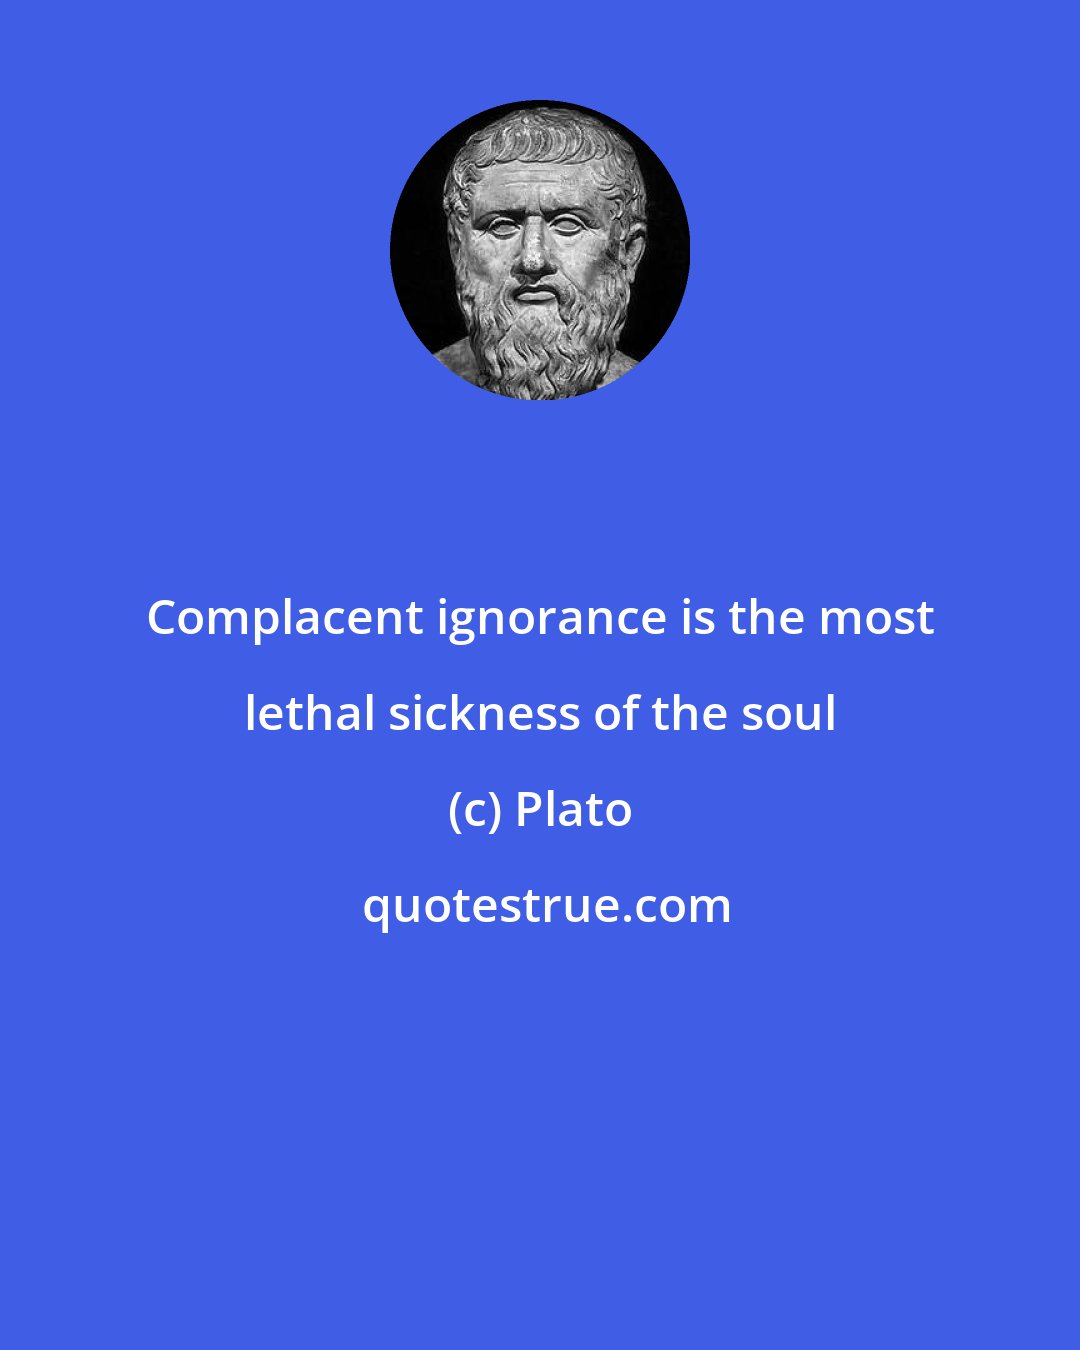 Plato: Complacent ignorance is the most lethal sickness of the soul